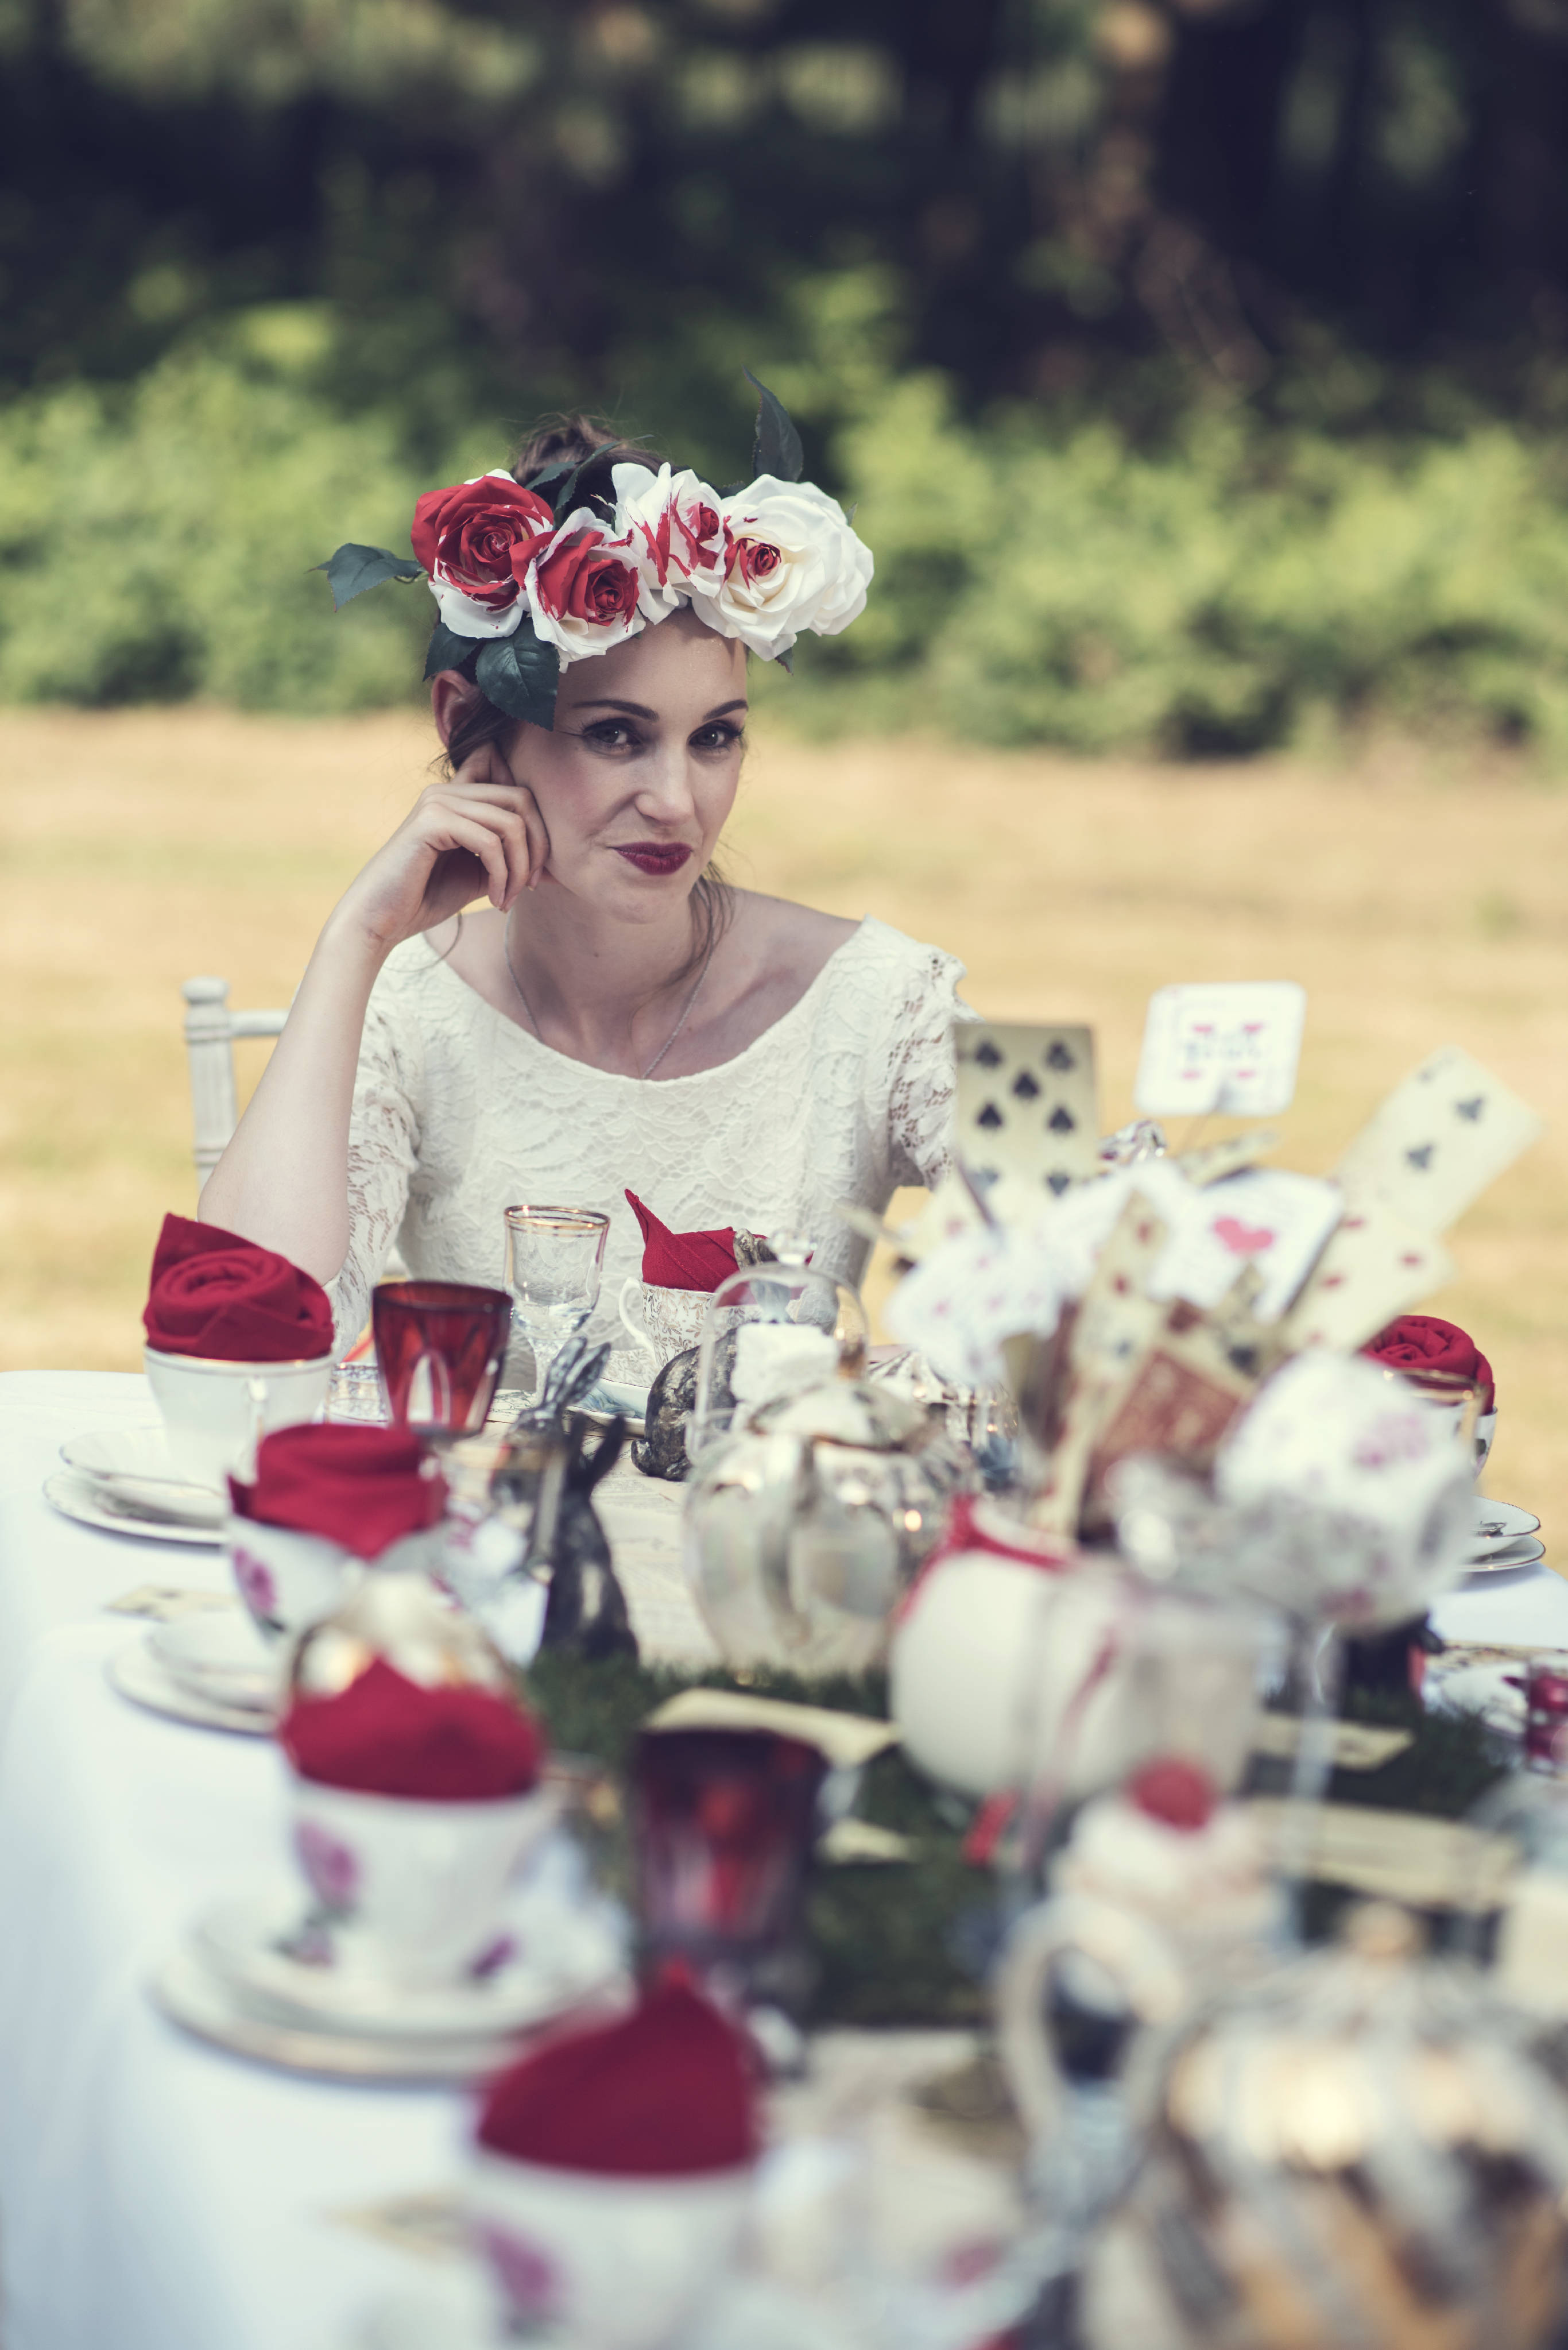 Alice in Wonderland wedding inspiration - mad hatters tea party - alternative and unconventional wedding